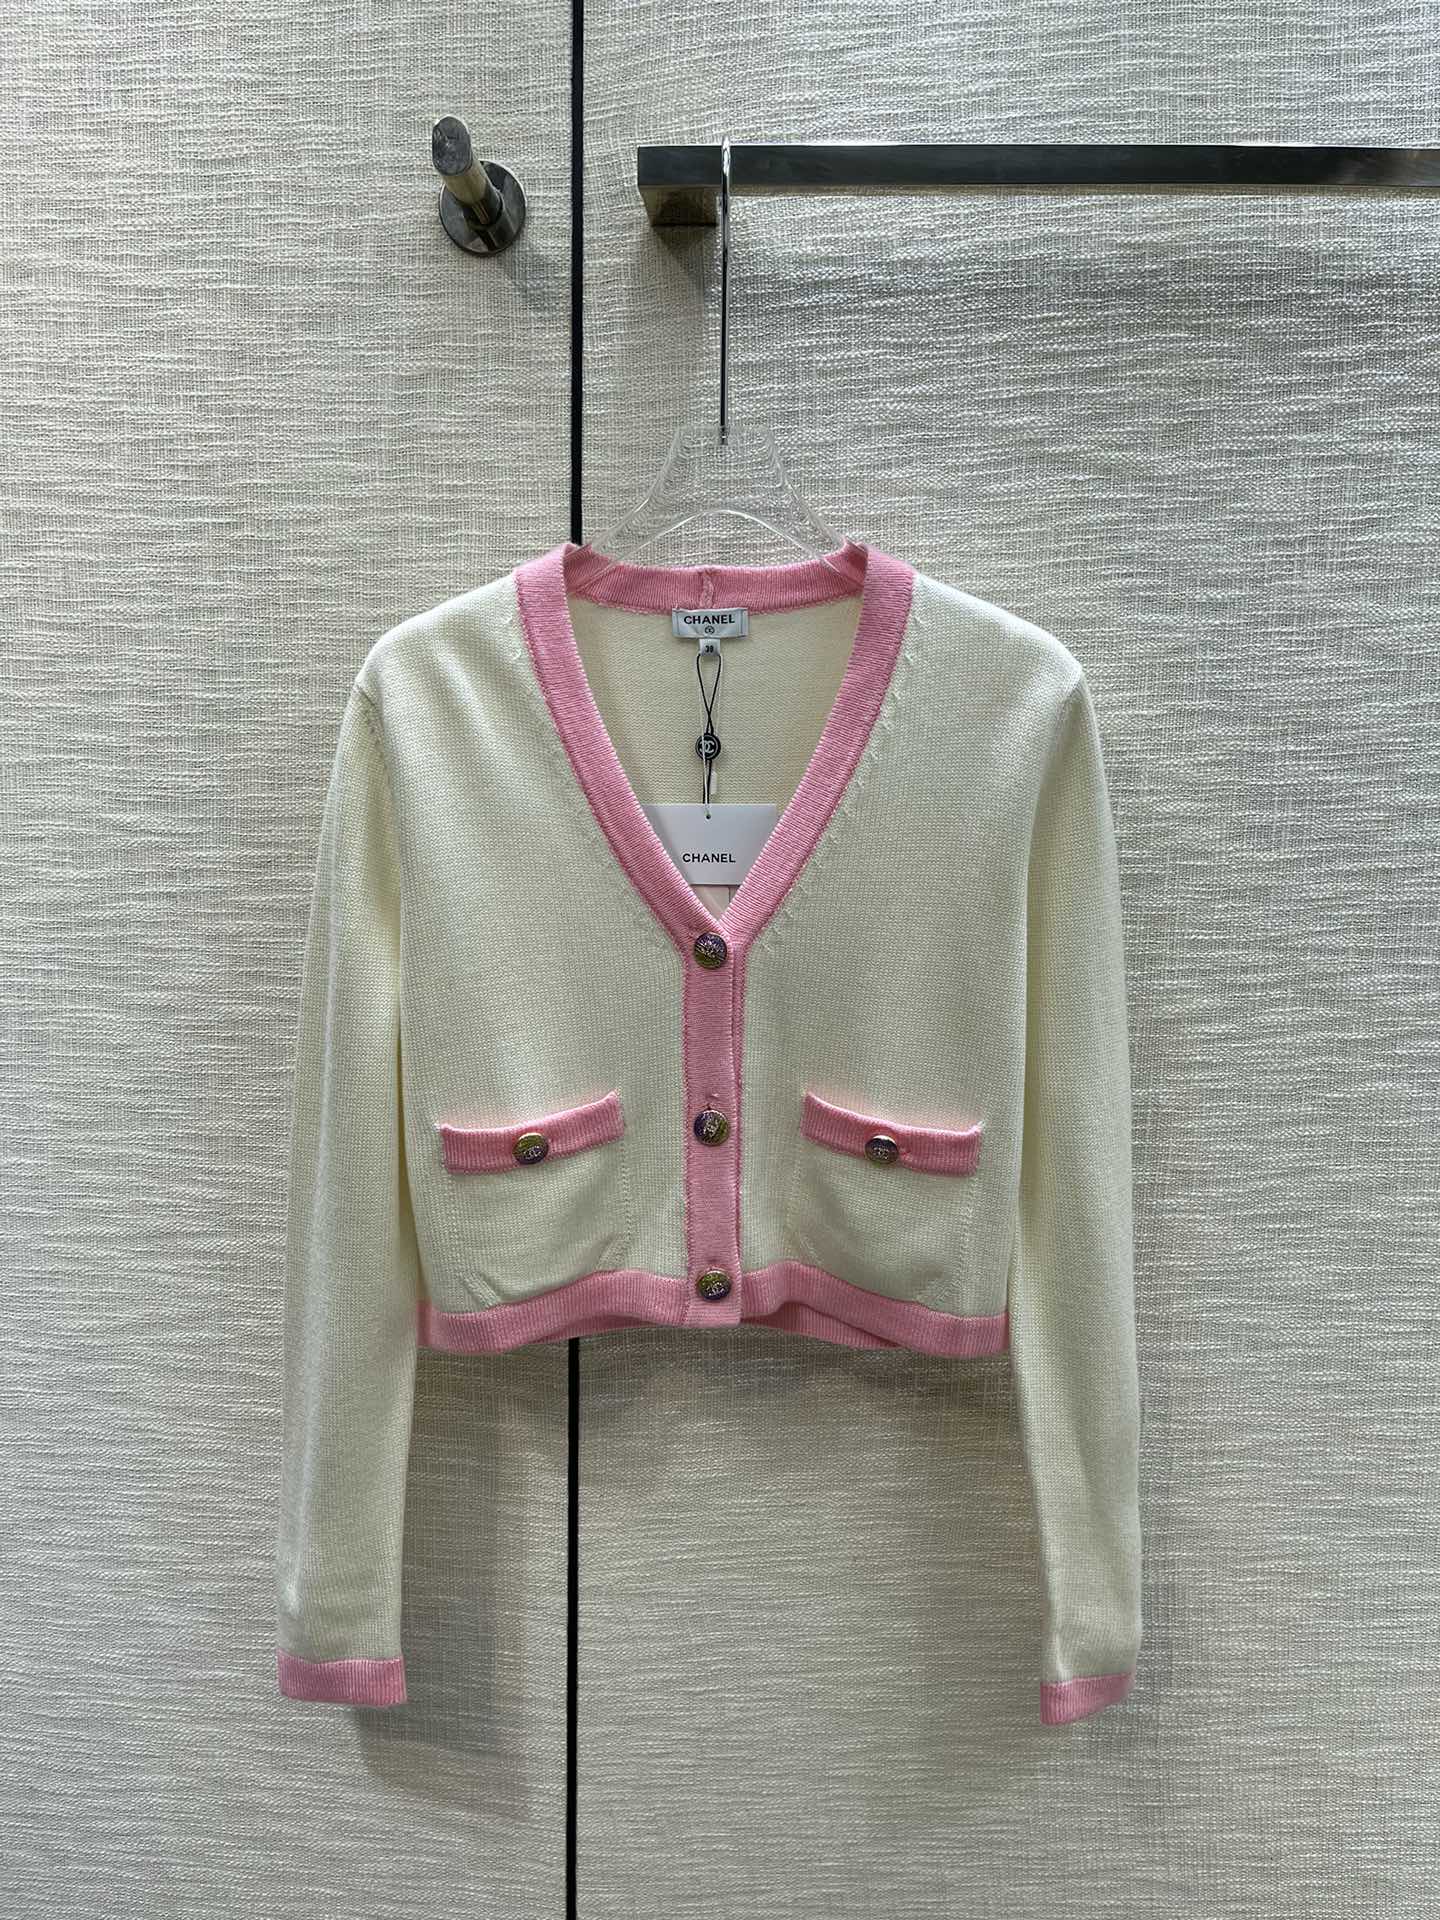 Chanel Clothing Cardigans Knit Sweater Online Sales
 Pink White Knitting Spring Collection